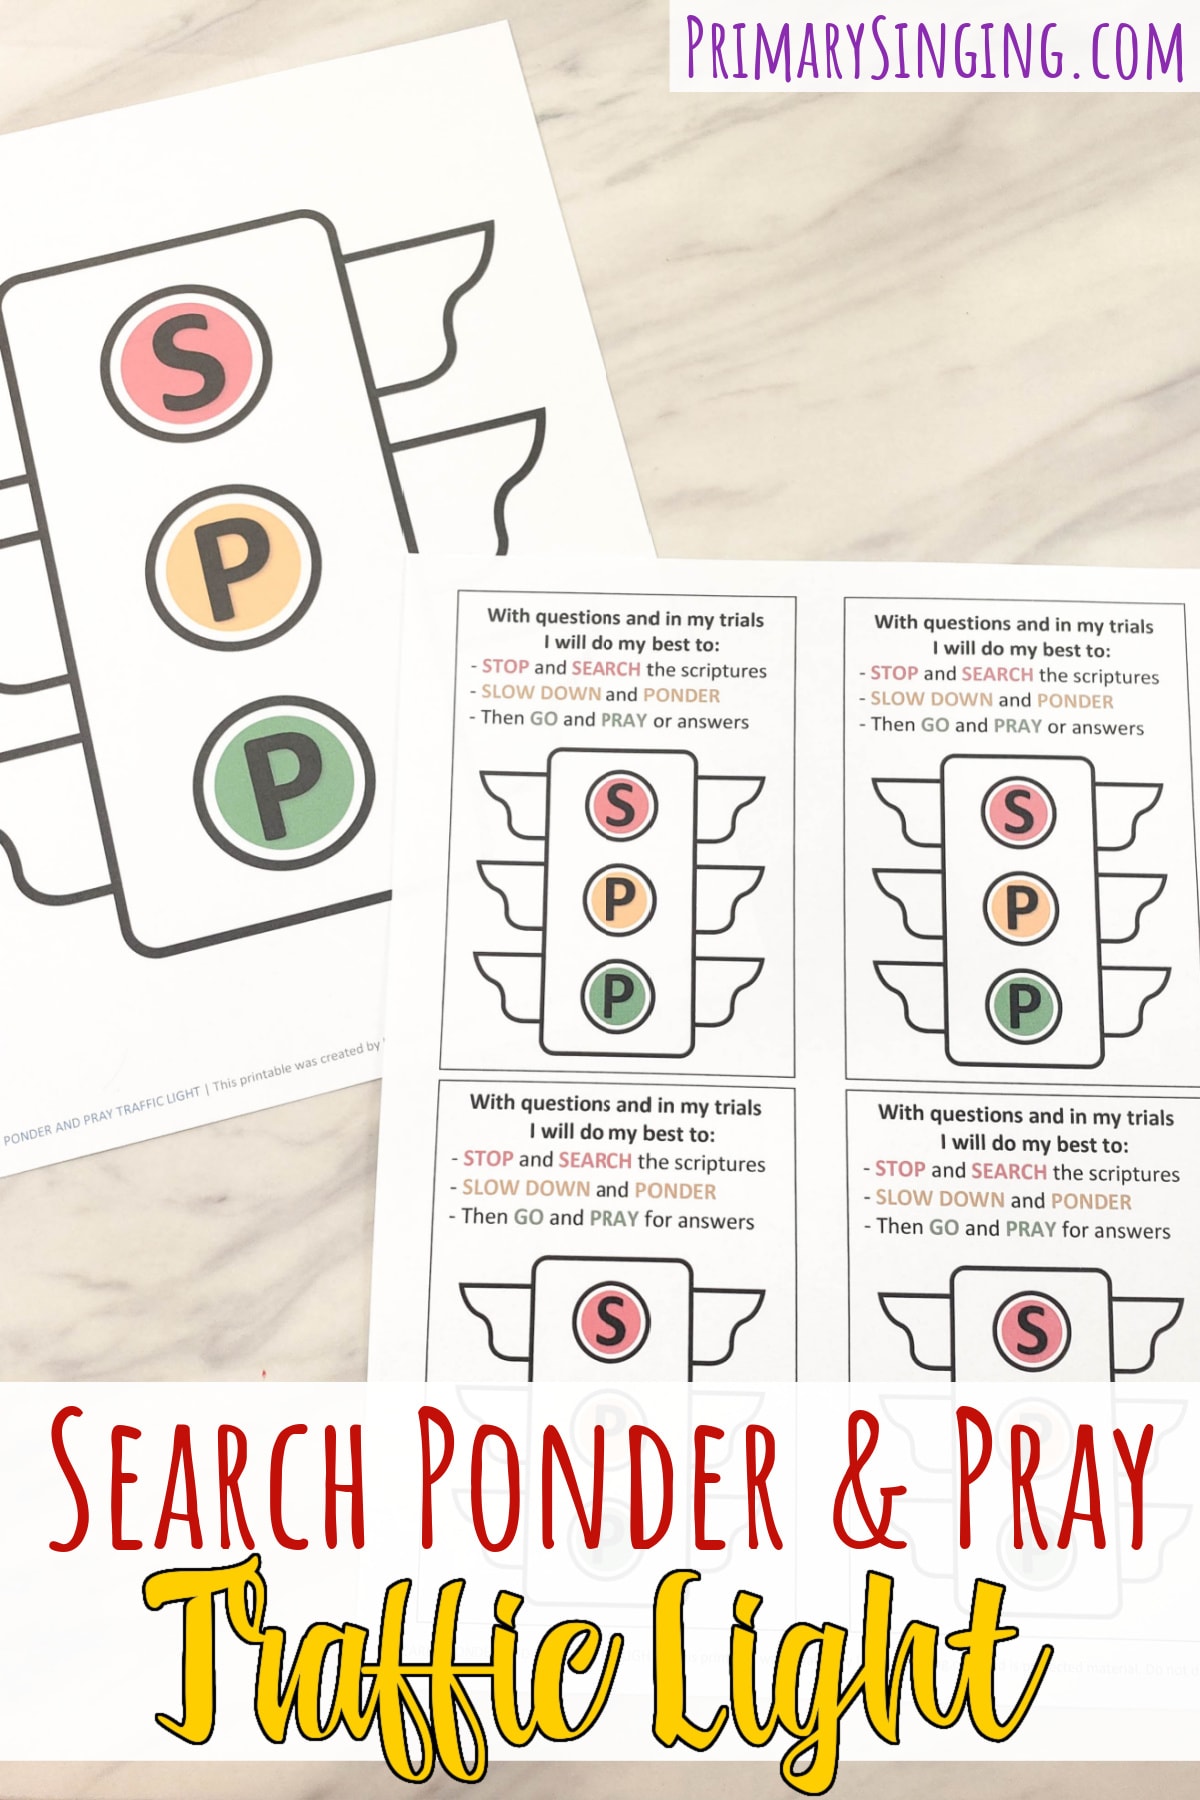 Search Ponder and Pray Traffic Light Singing time idea for LDS Primary music leaders including printable song helps to help you teach Search Ponder & Pray!